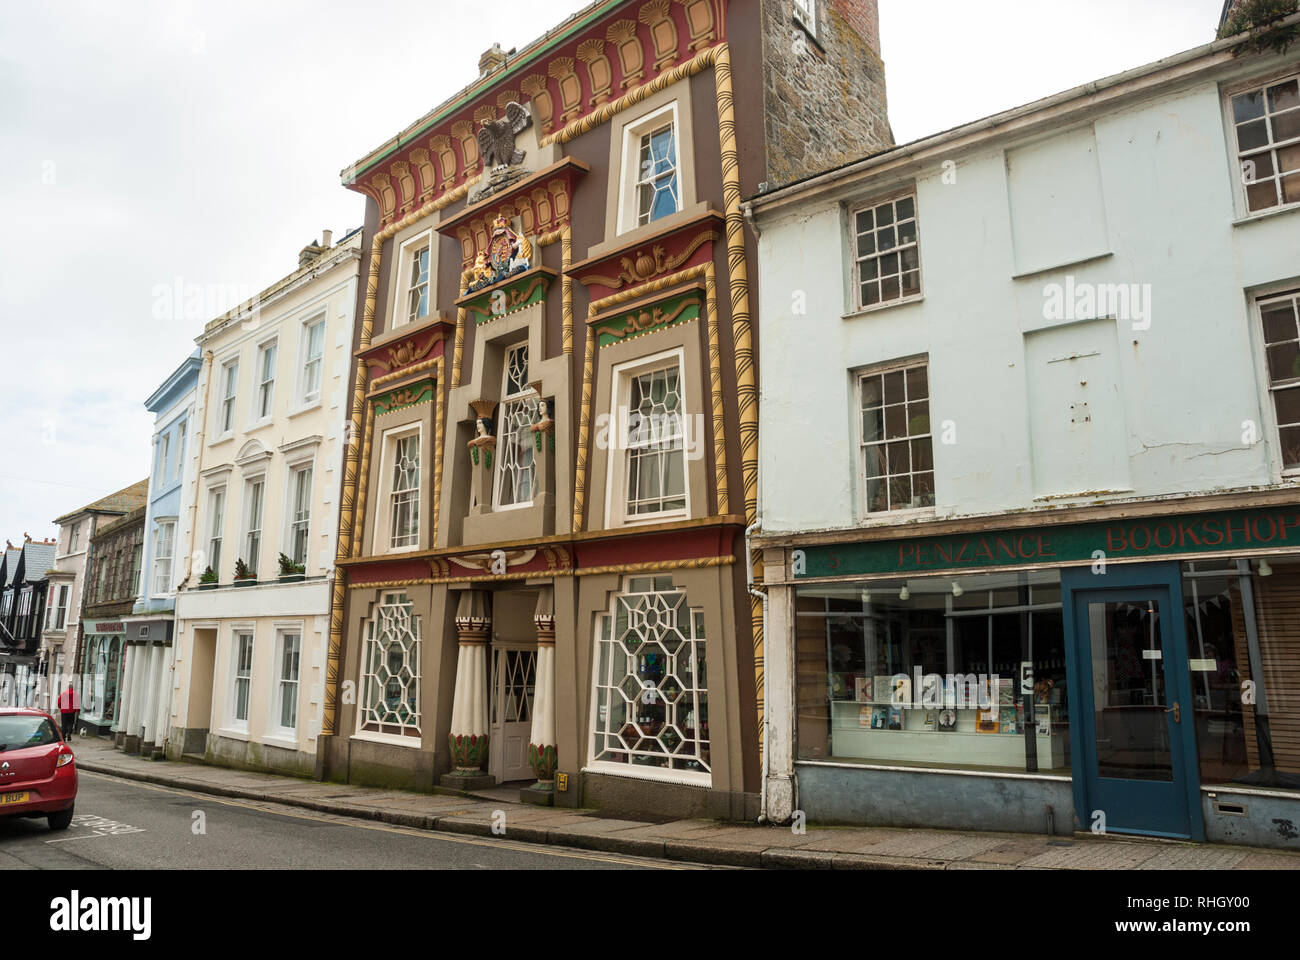 View along Chapel Street, Penzance, Cornwall with the amazing colourful facade and architecture of Egyptian House. Stock Photo